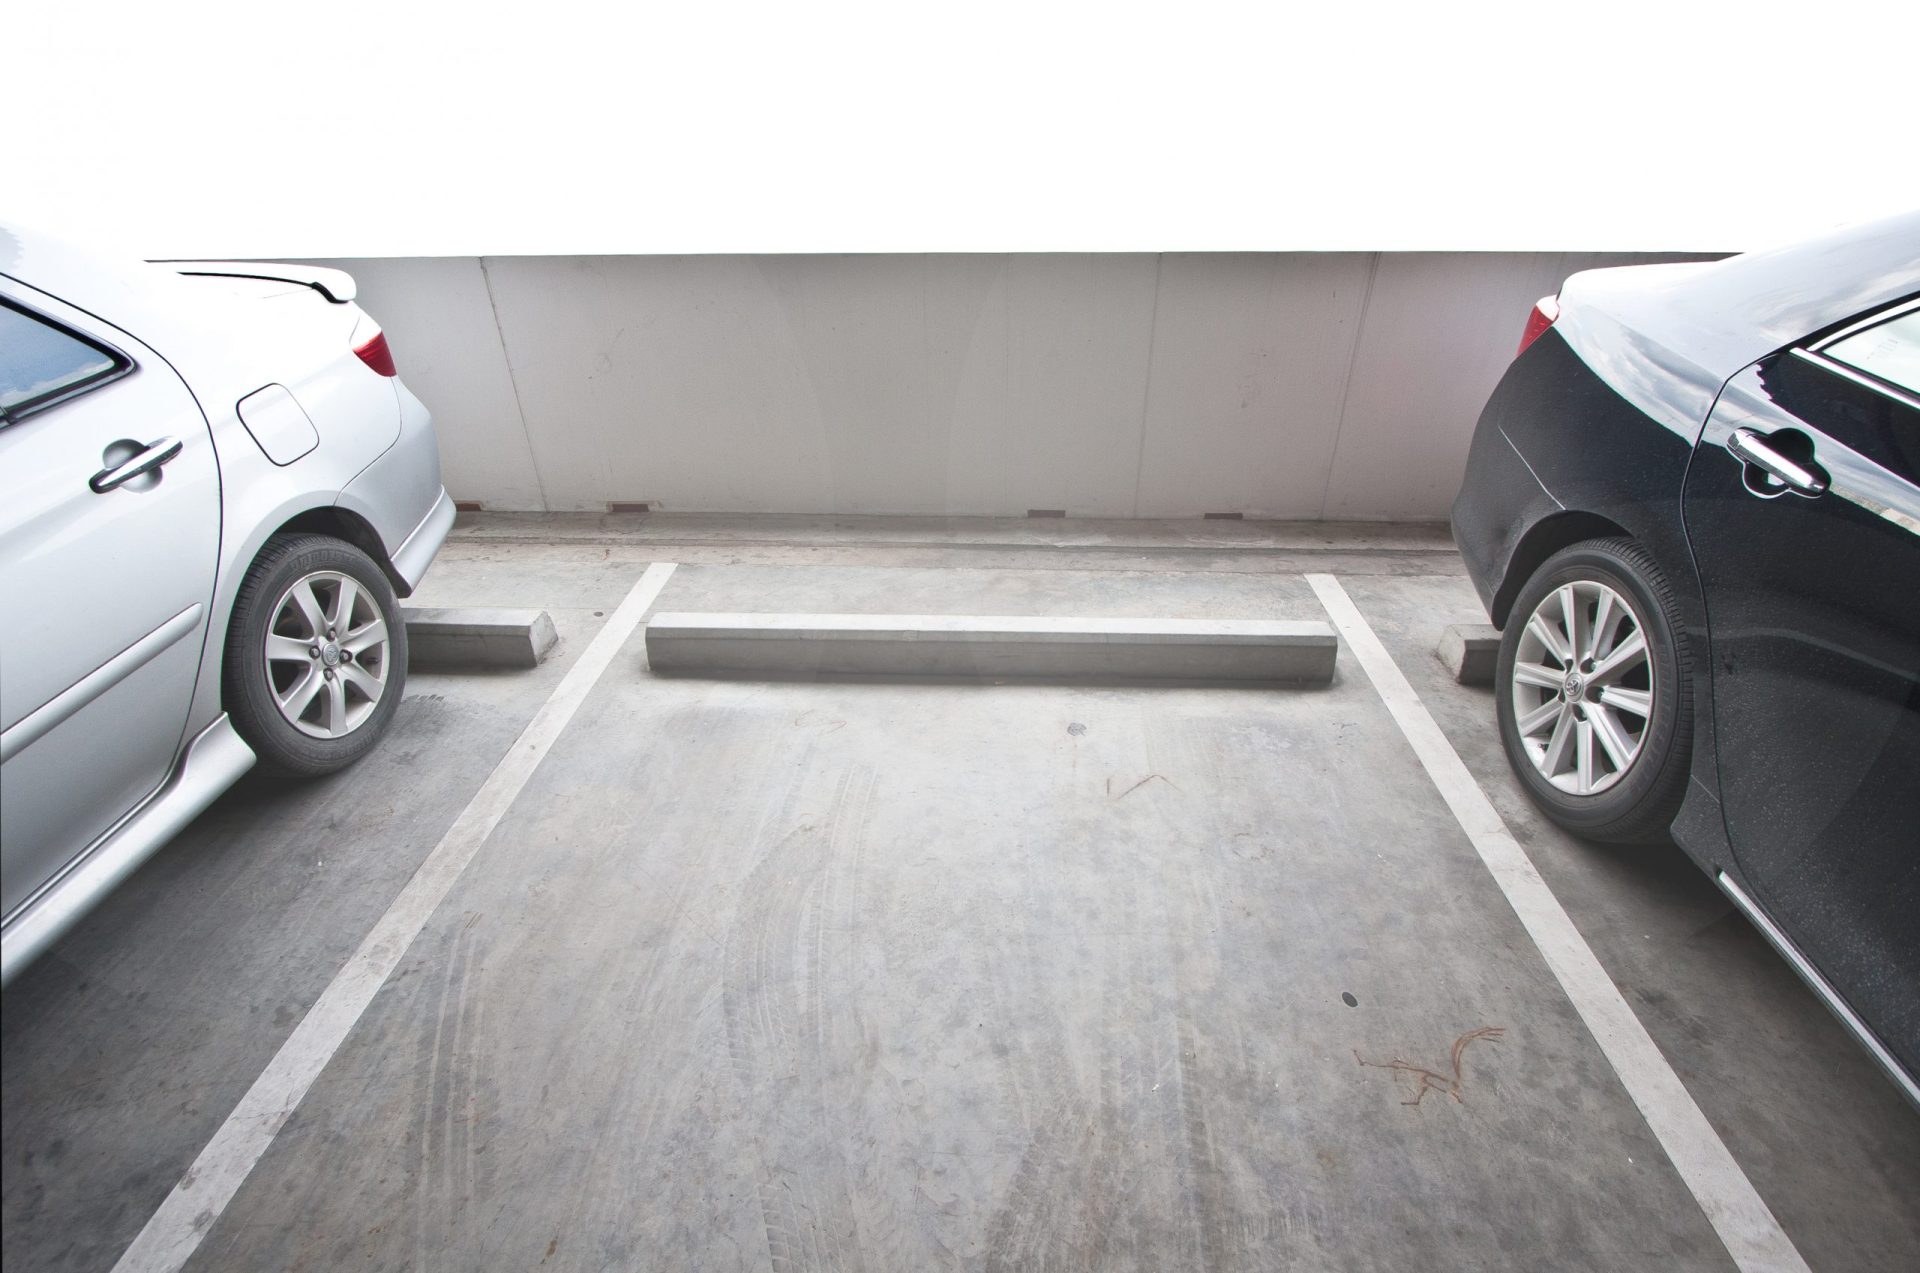 Empy parking space with two near cars